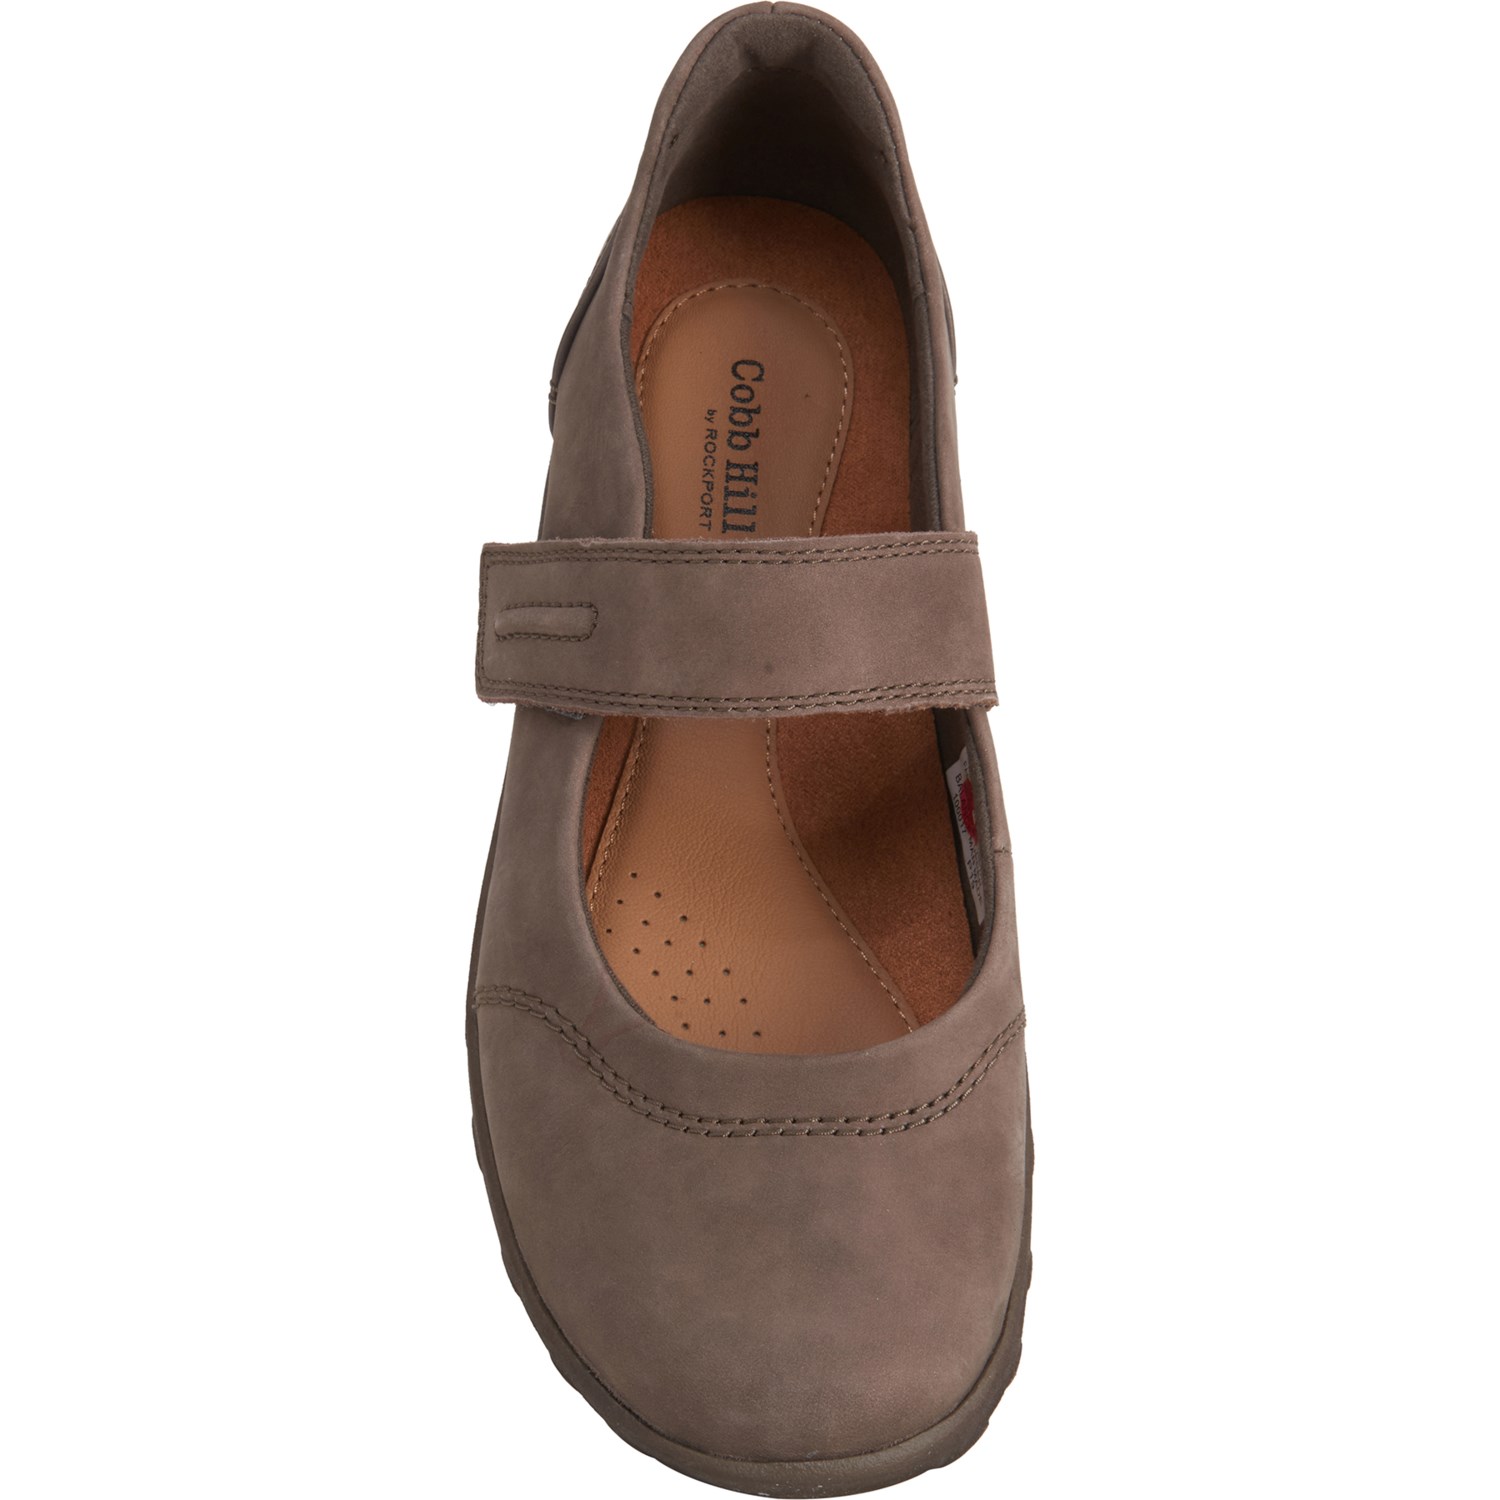 Cobb Hill Amalie Mary Jane Shoes (For Women) - Save 54%